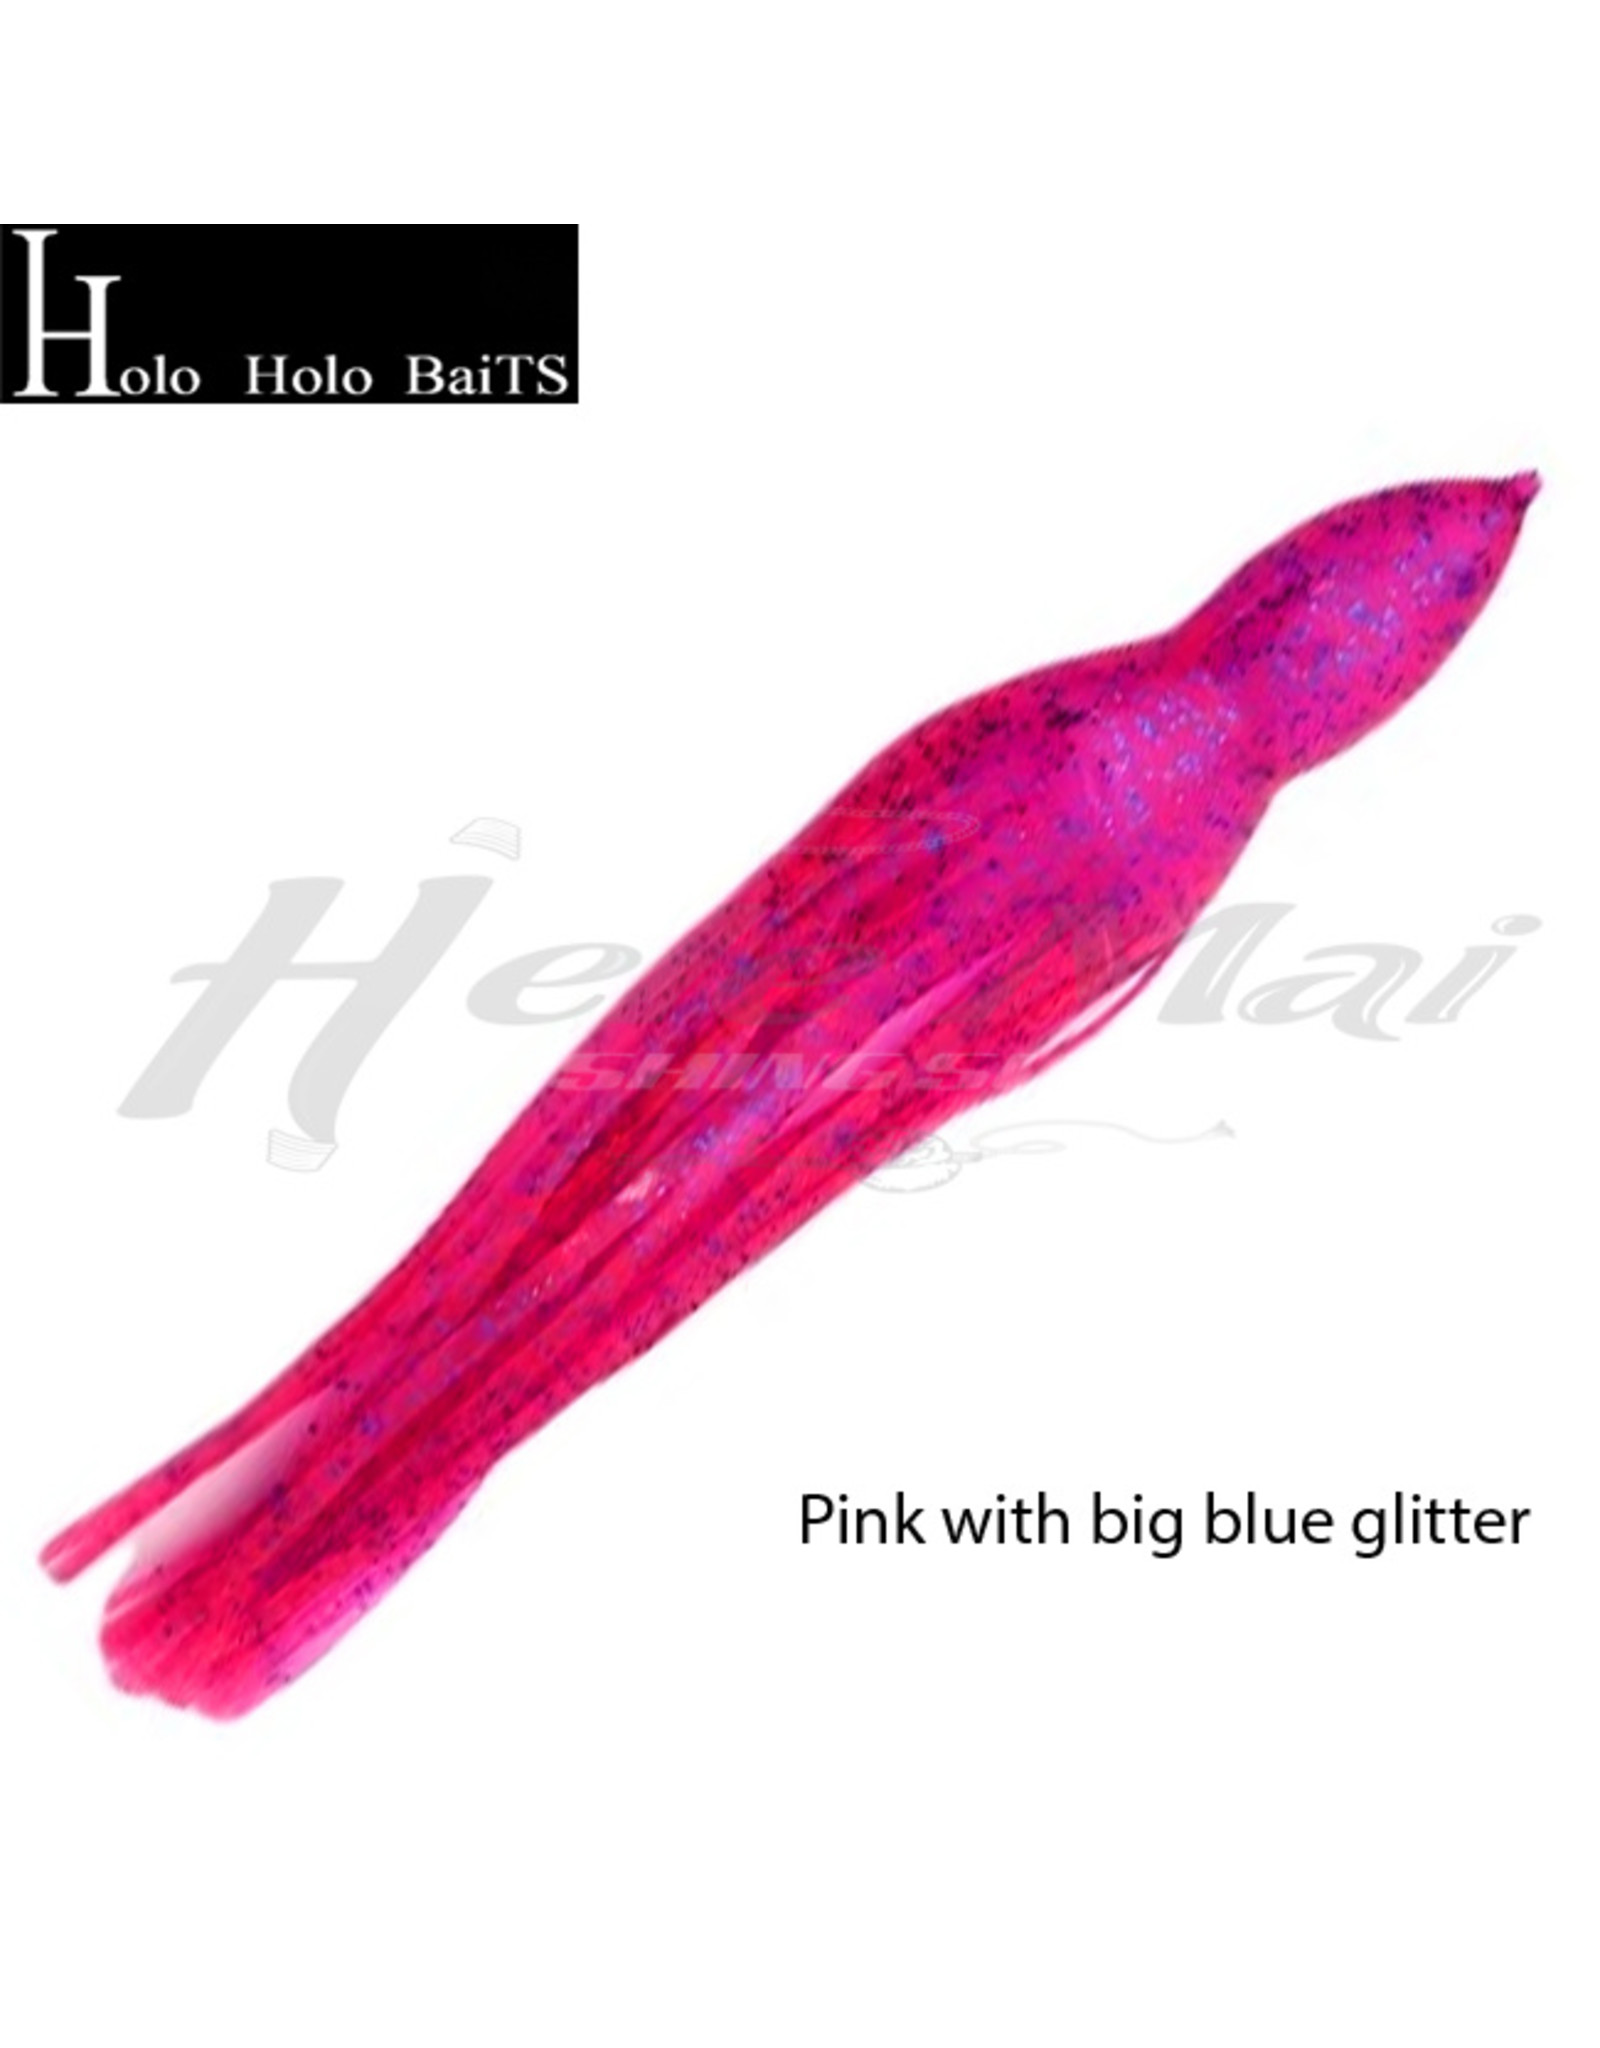 HOLO HOLO HH, 7" SQUID SKIRT PINK GLITTER 0887